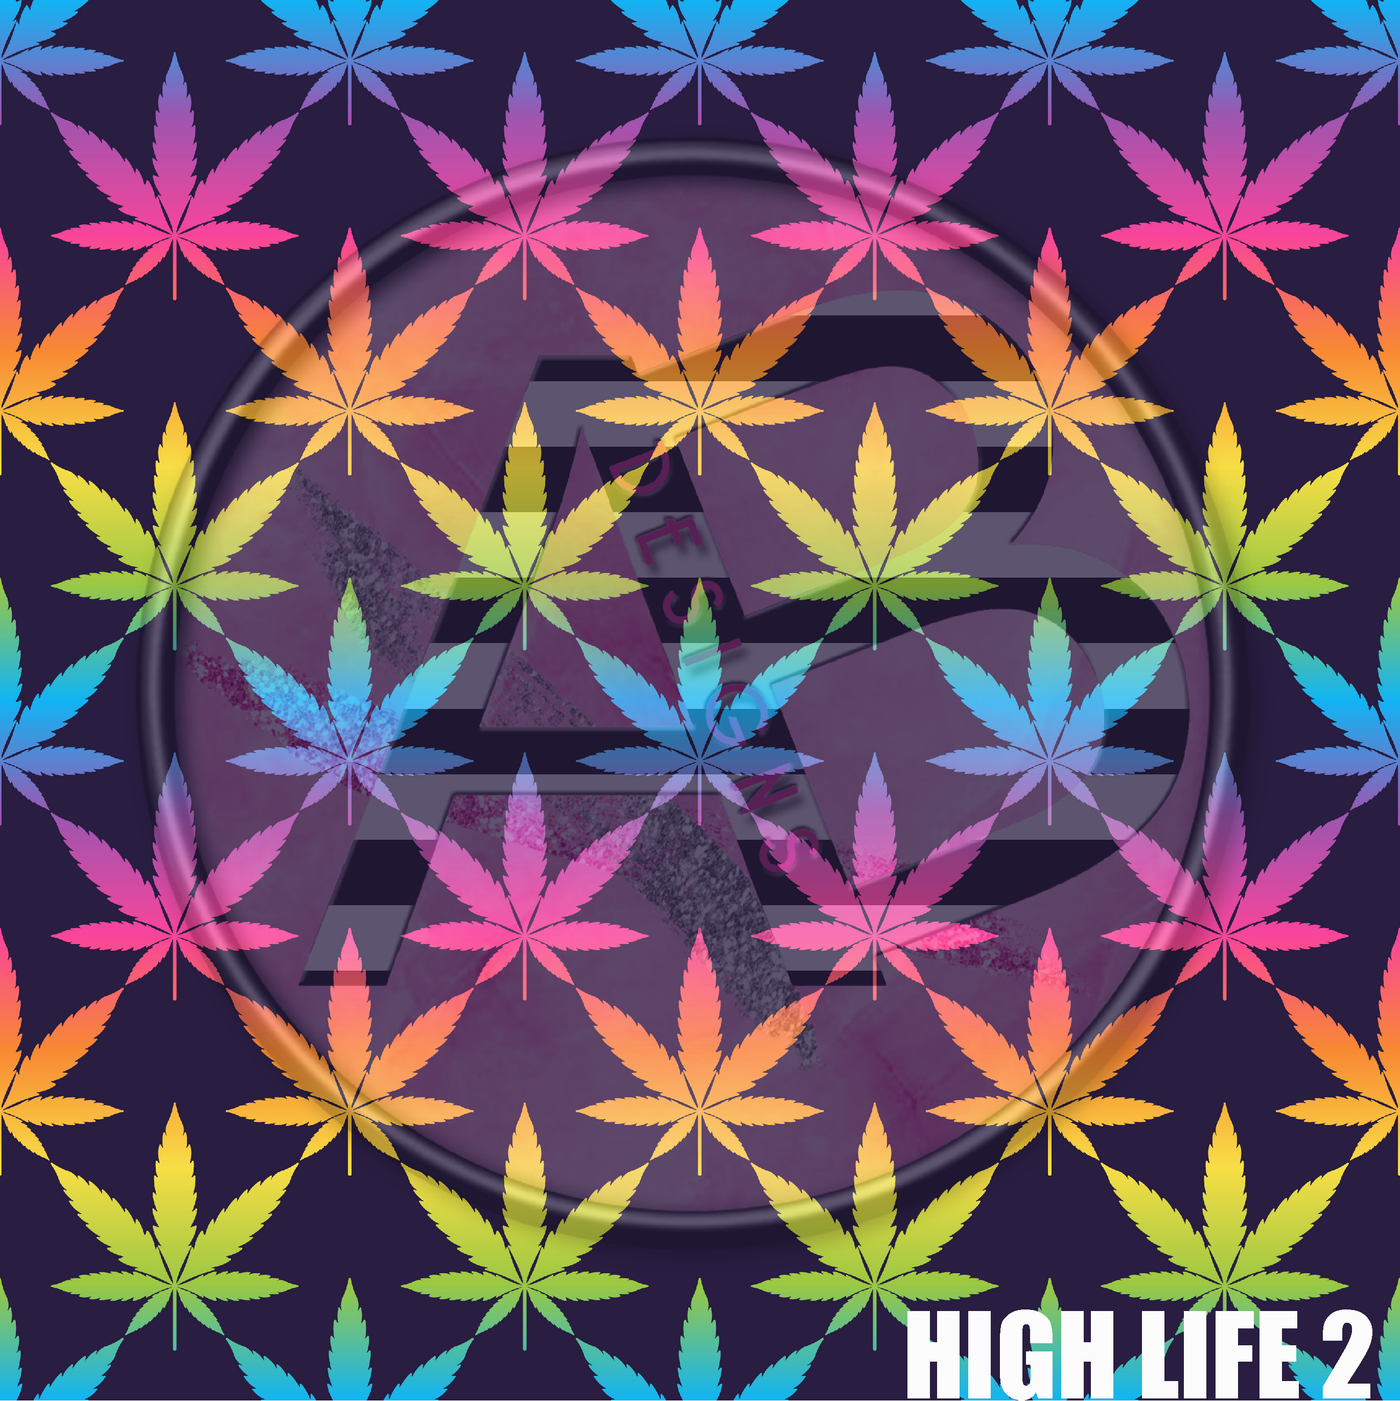 Adhesive Patterned Vinyl - High Life 2